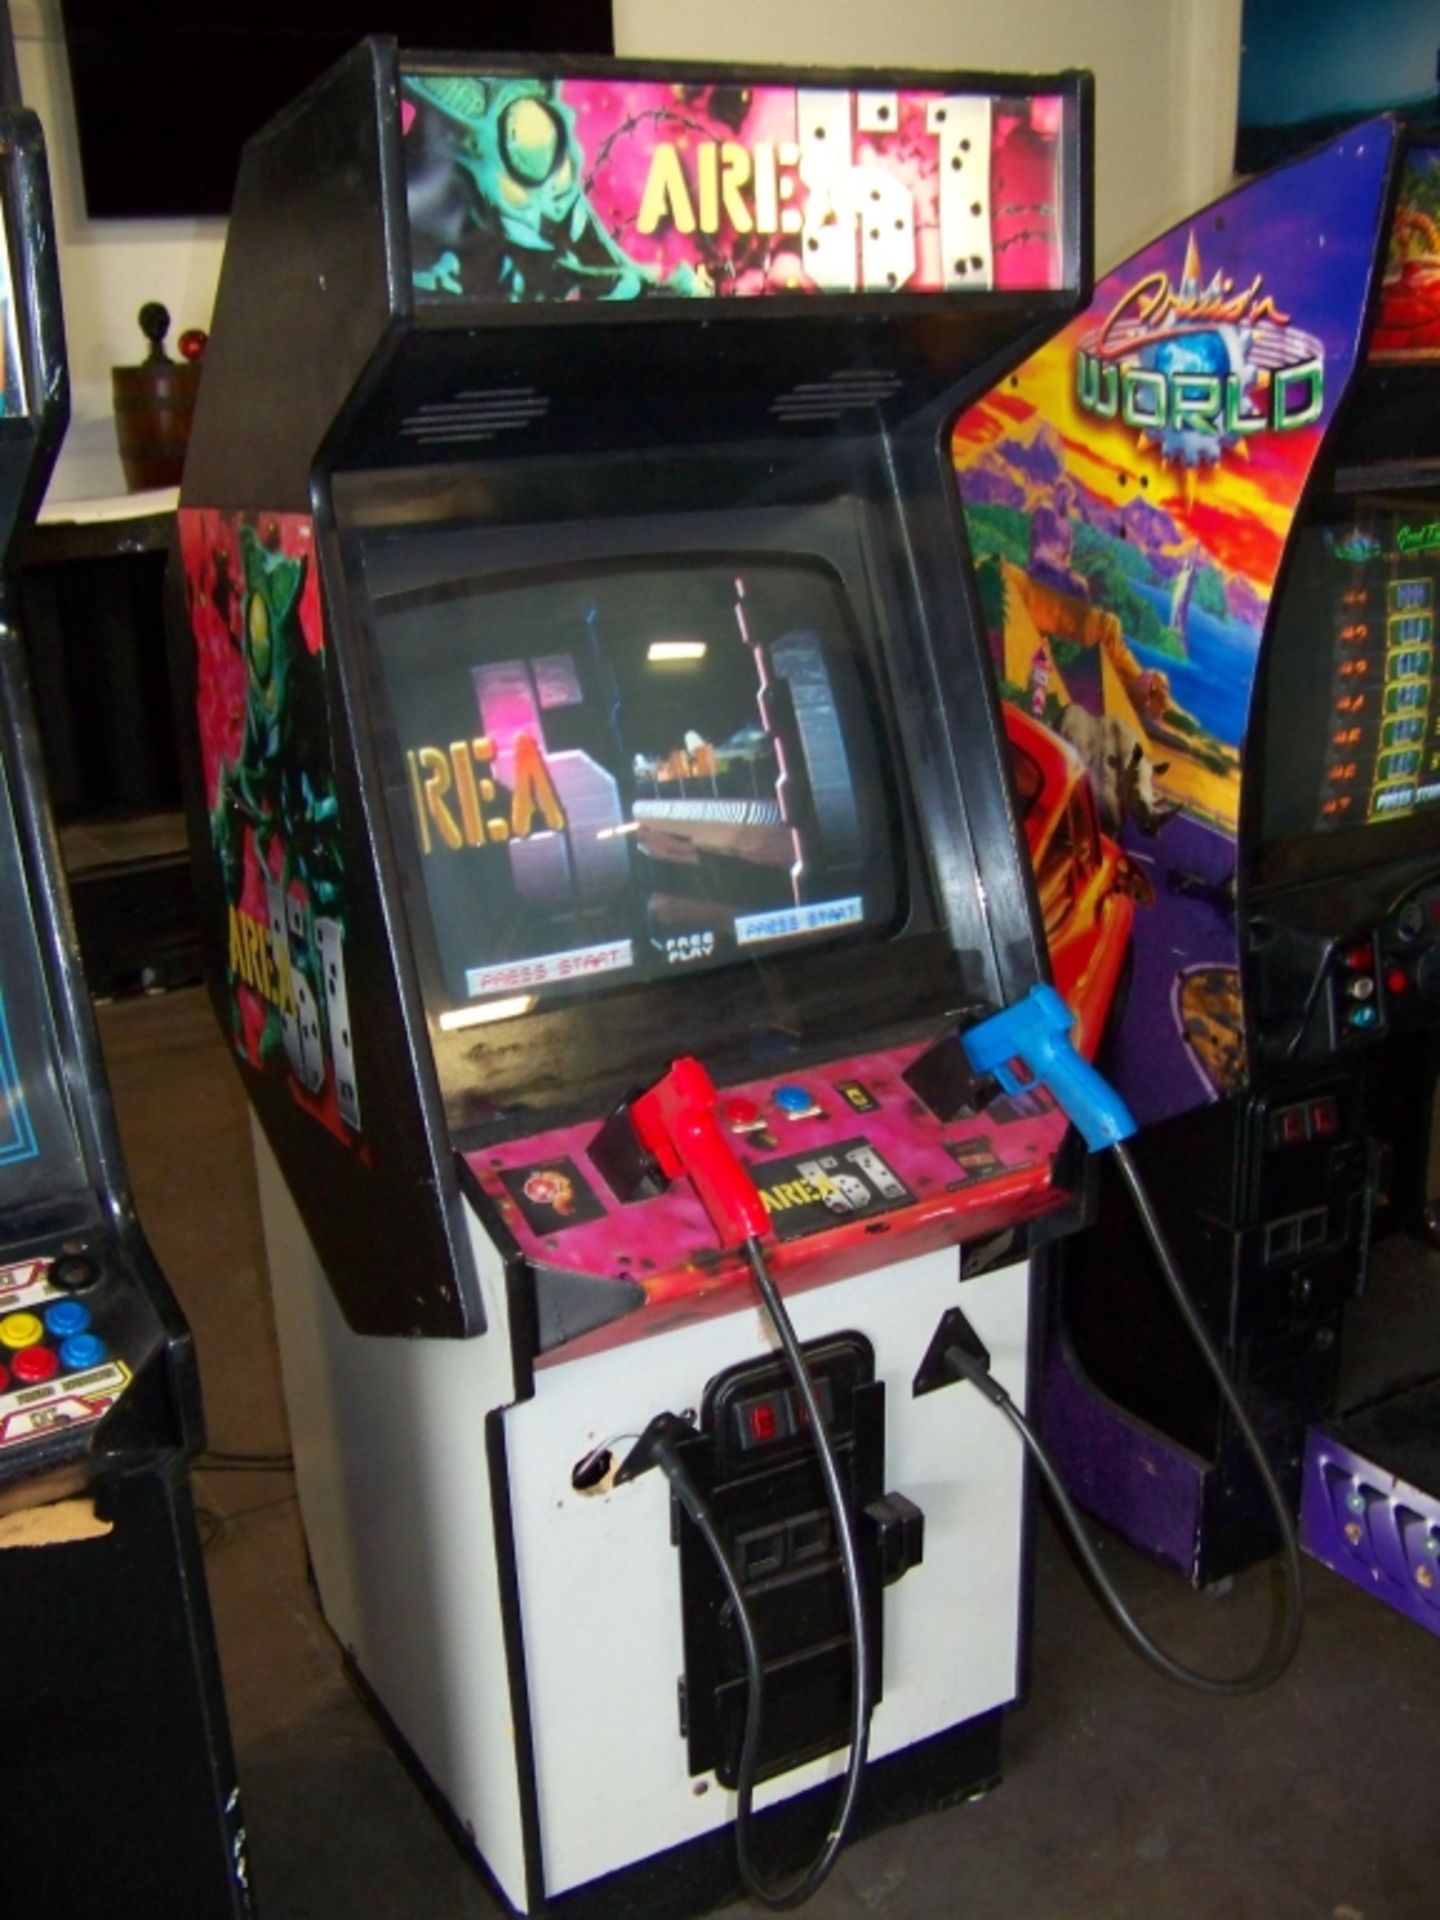 AREA 51 SHOOTER ARCADE GAME ATARI Item is in used condition. Evidence of wear and commercial